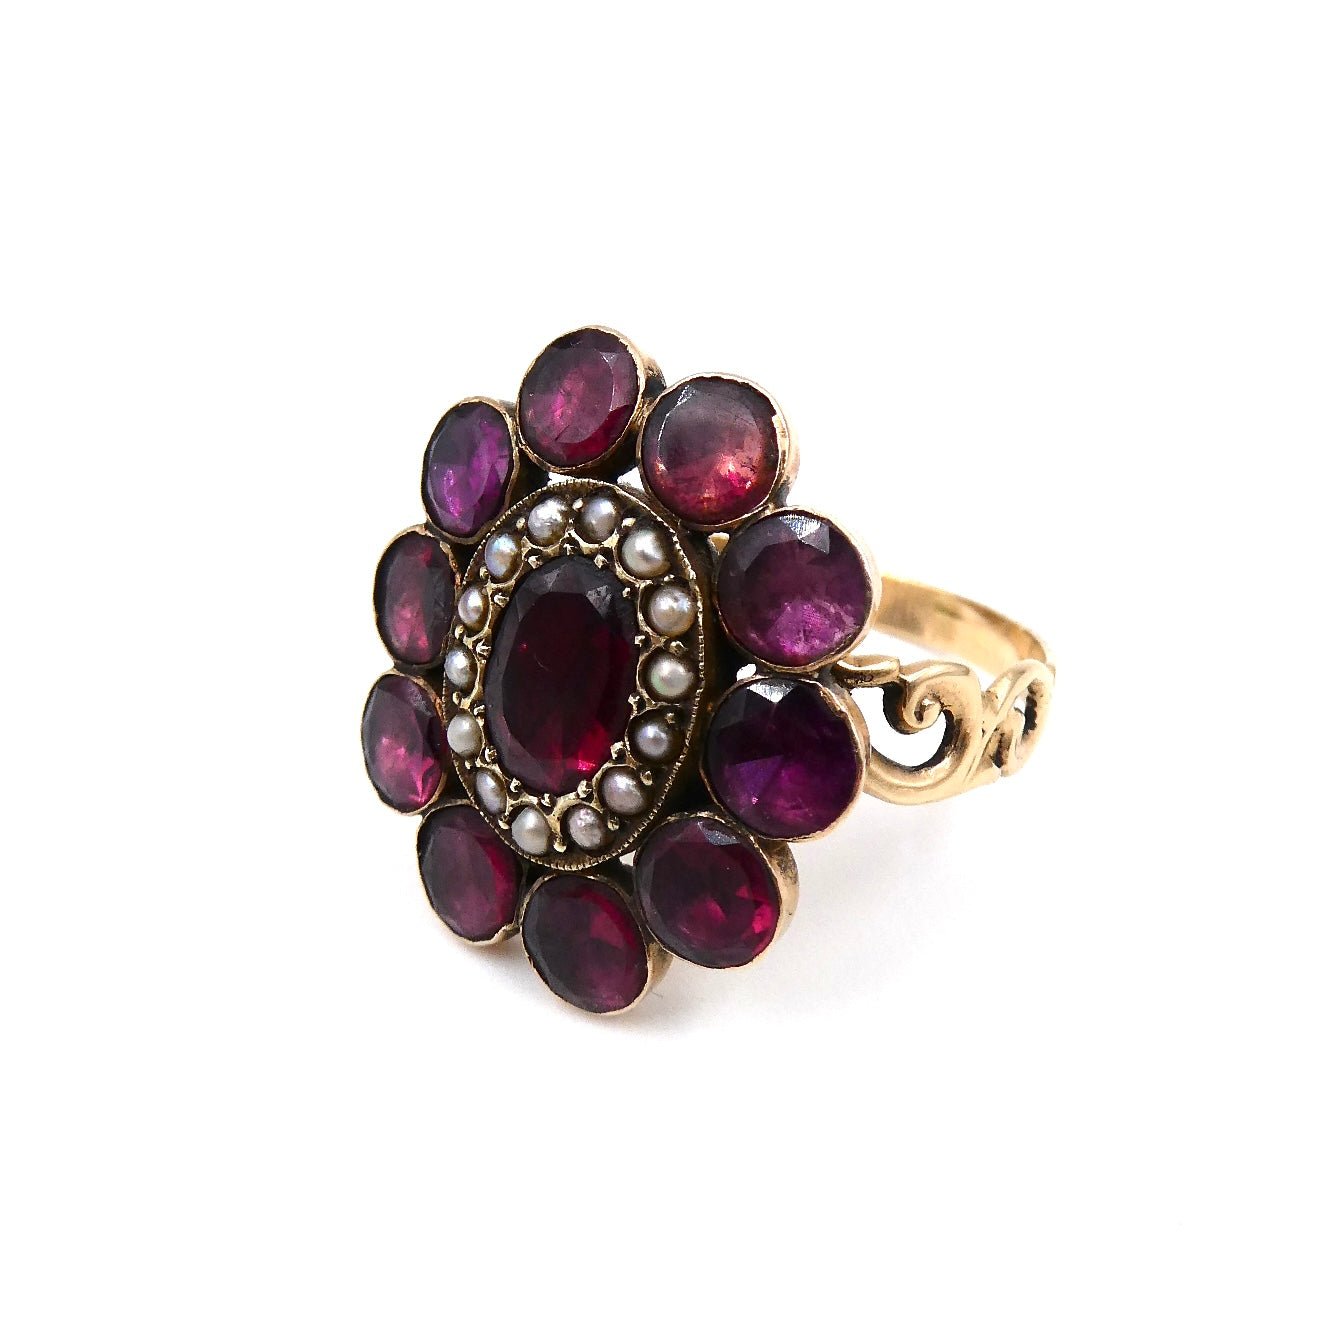 Georgian garnet and pearl ring, stunning statement garnet ring on an ornate gold band. - Collected